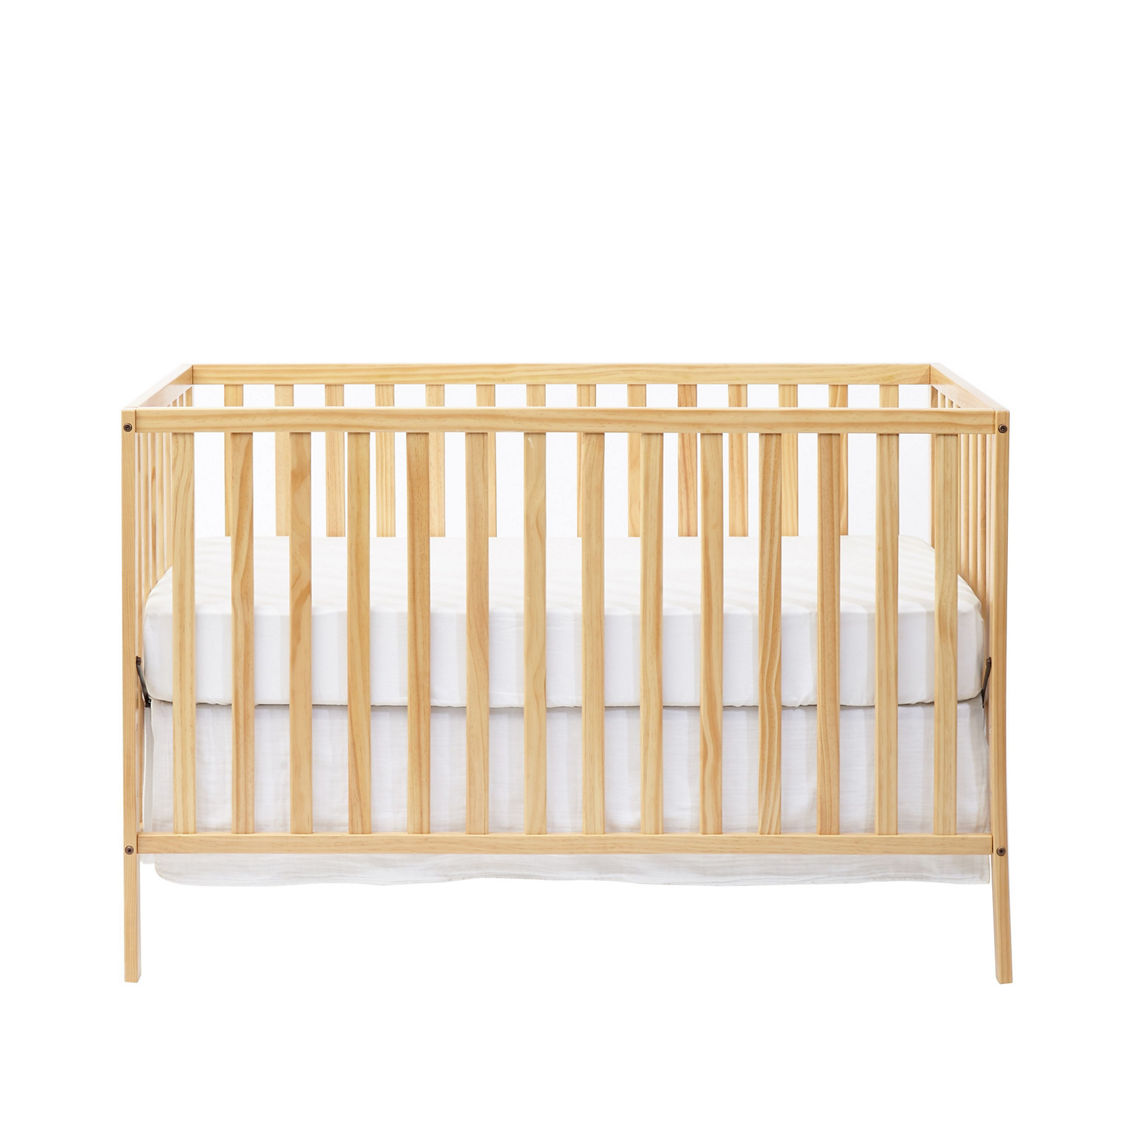 Suite Bebe Palmer 3-in-1 Convertible Island Crib Natural - Image 2 of 5